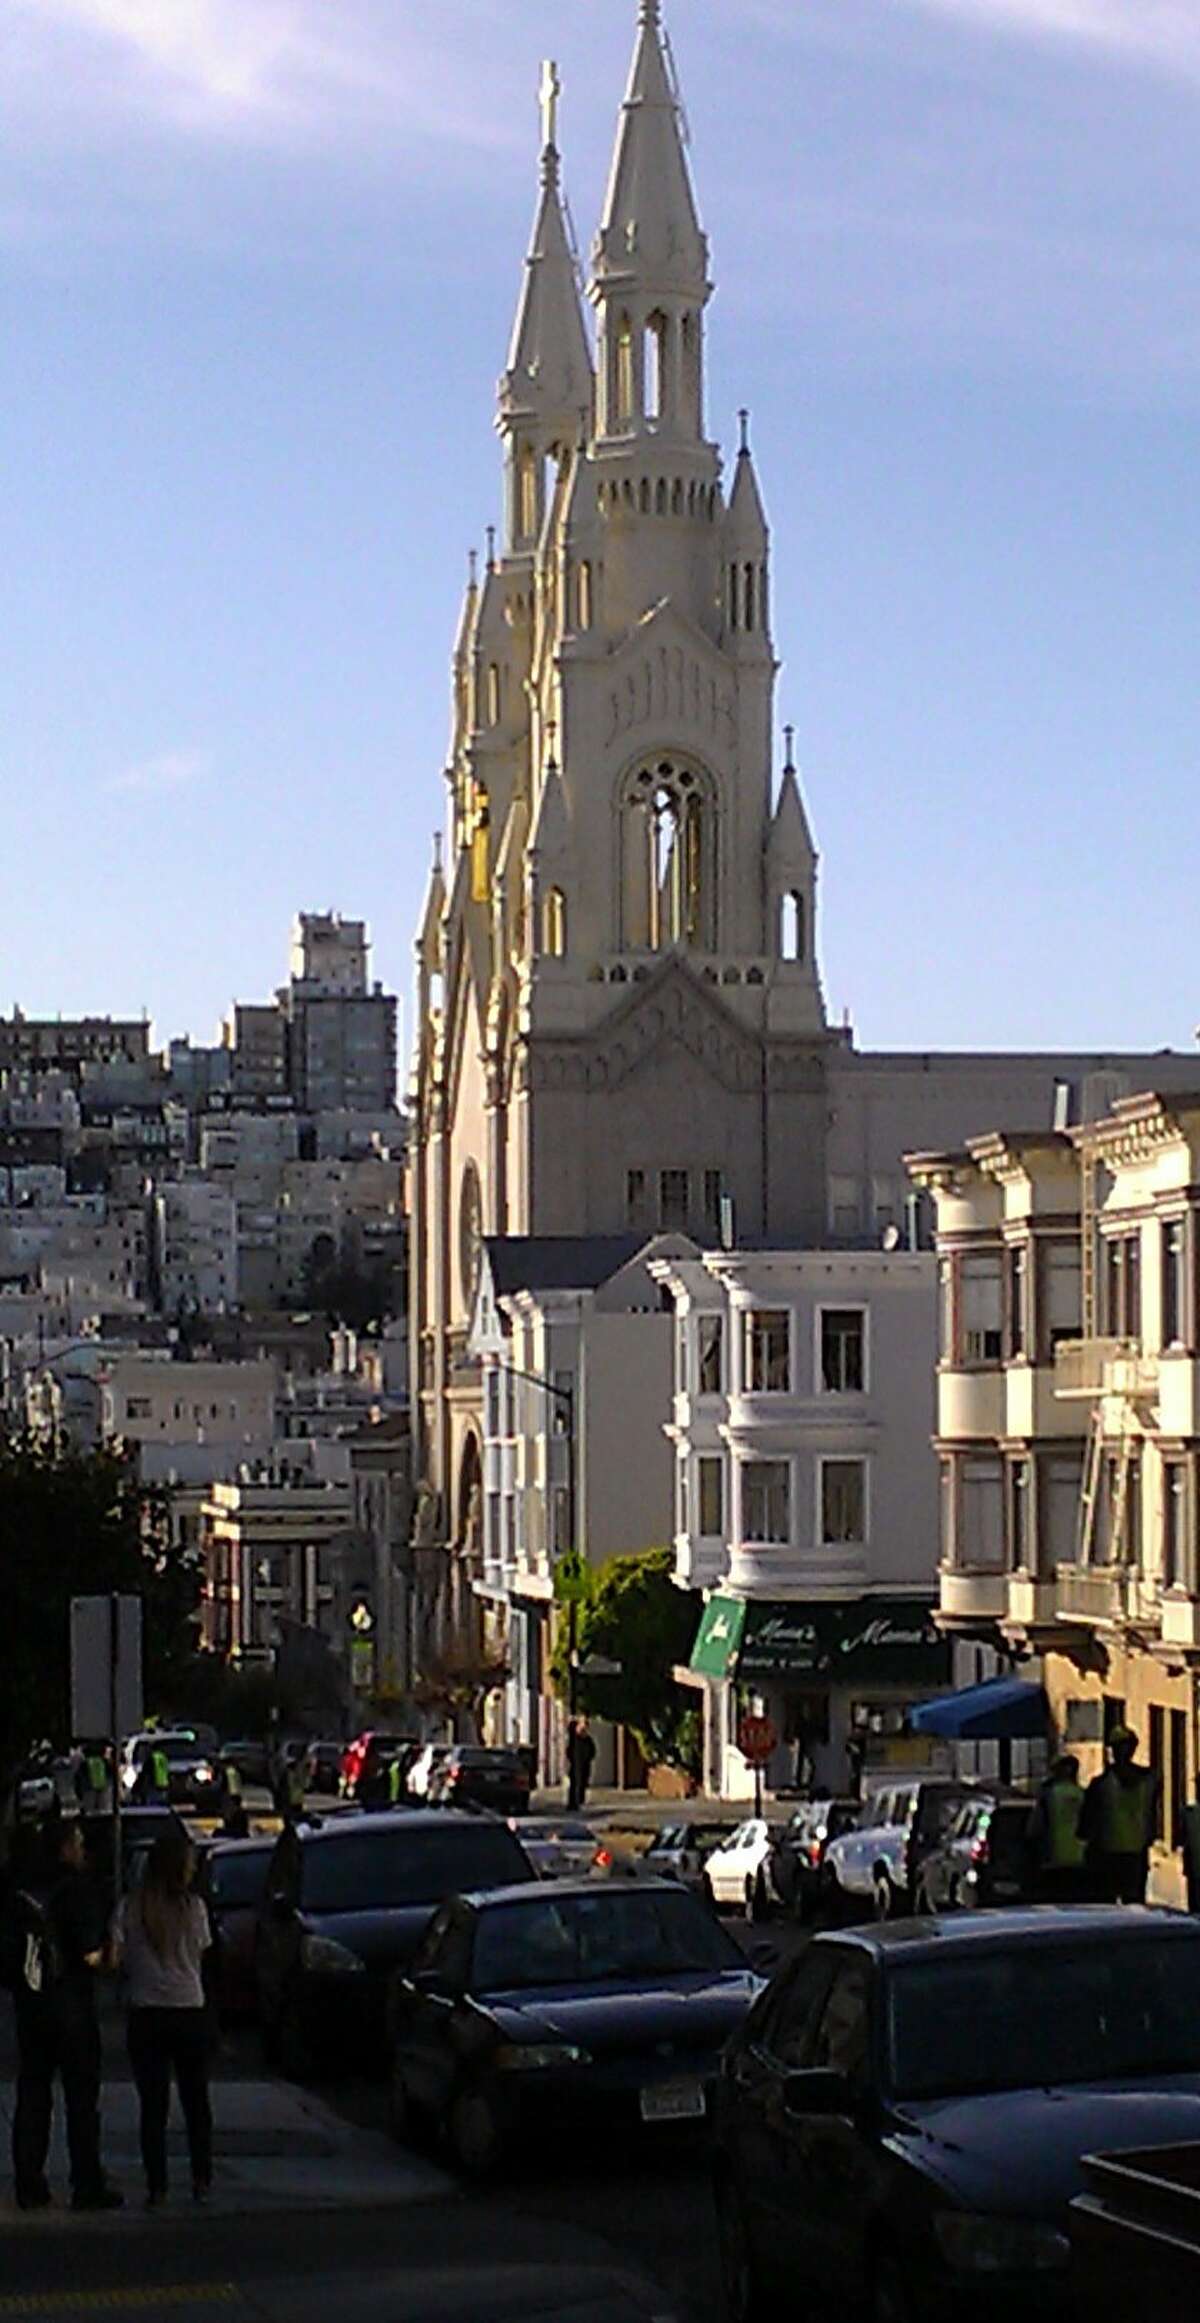 Sts. Peter and Paul Church at Washington Square in North Beach shows that architecture succeeds on multiple levels: it offers neighorhood-wide atmosphere but also fine-grain Gothic details.